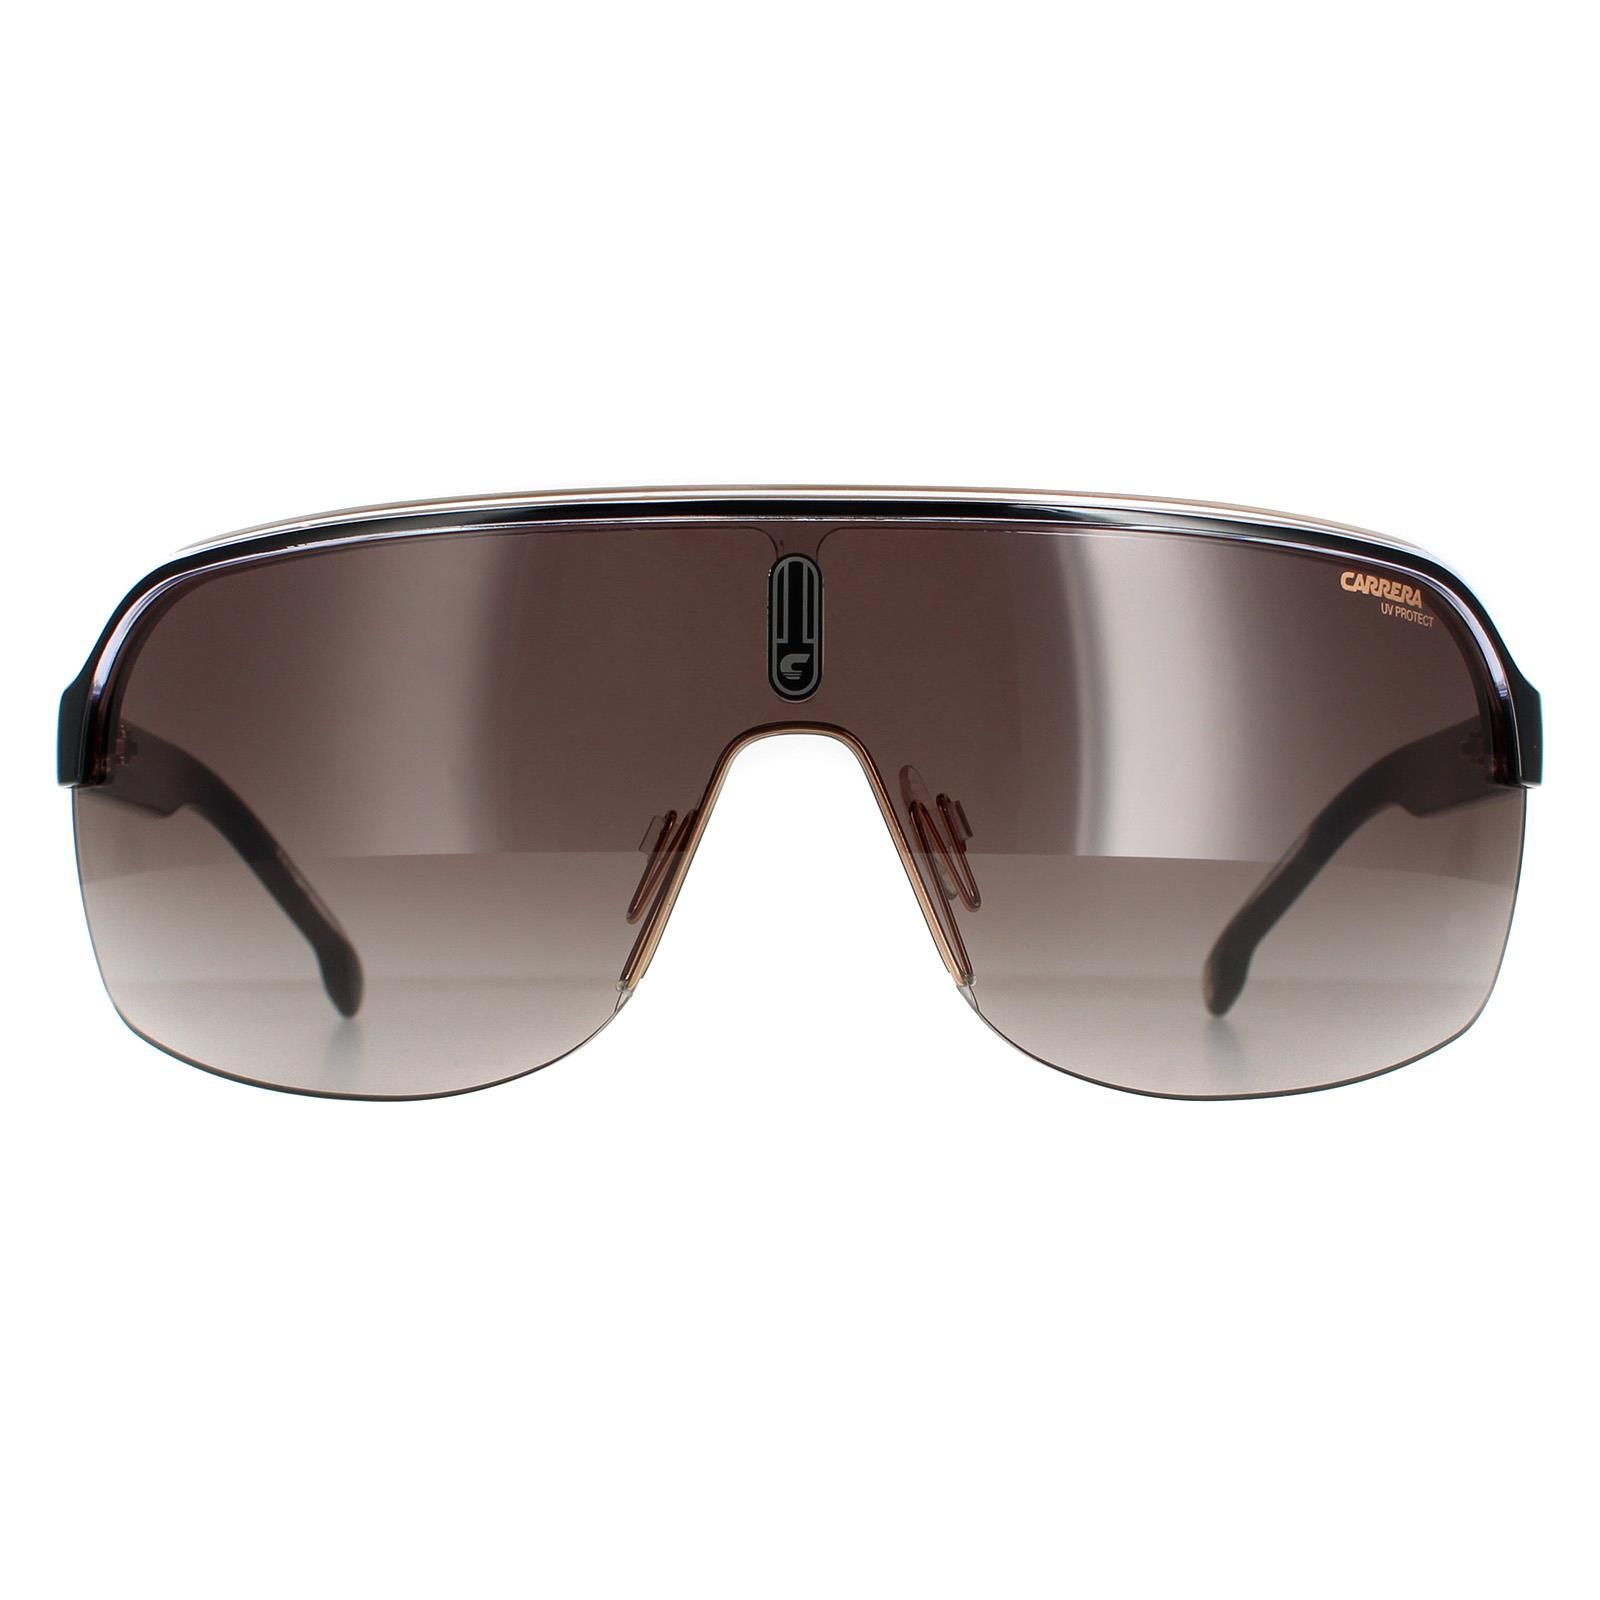 Carrera Shield Unisex Black Gold Brown Gradient Topcar 1/N  Carrera are a visor style sunglass with a large lens and thick brow bar with trendy twists of colour across the top.